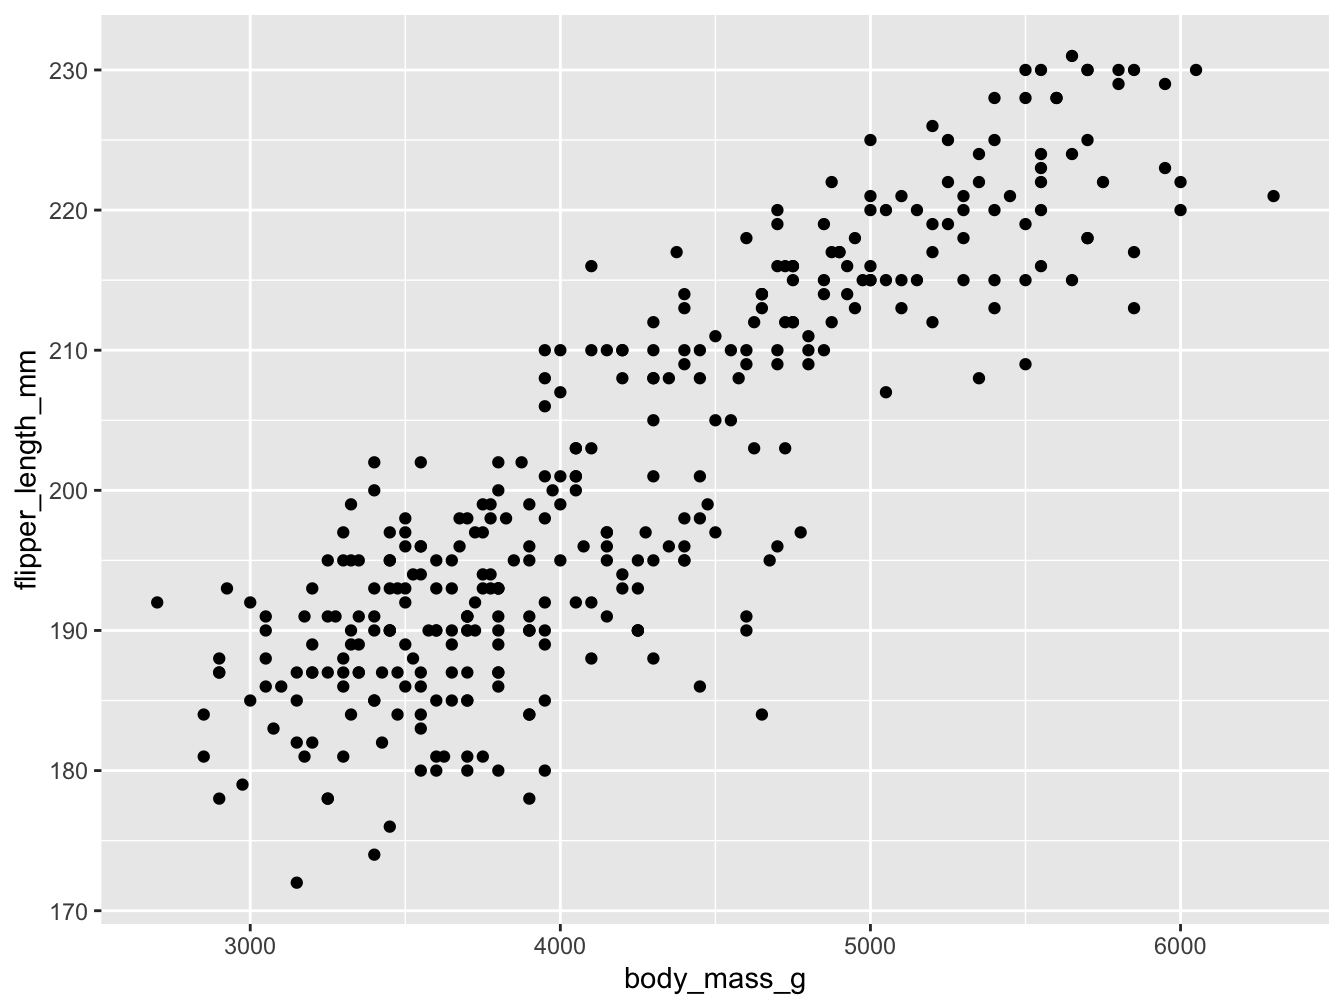 A basic scatterplot using geom_point(), but suffering from overplotting.